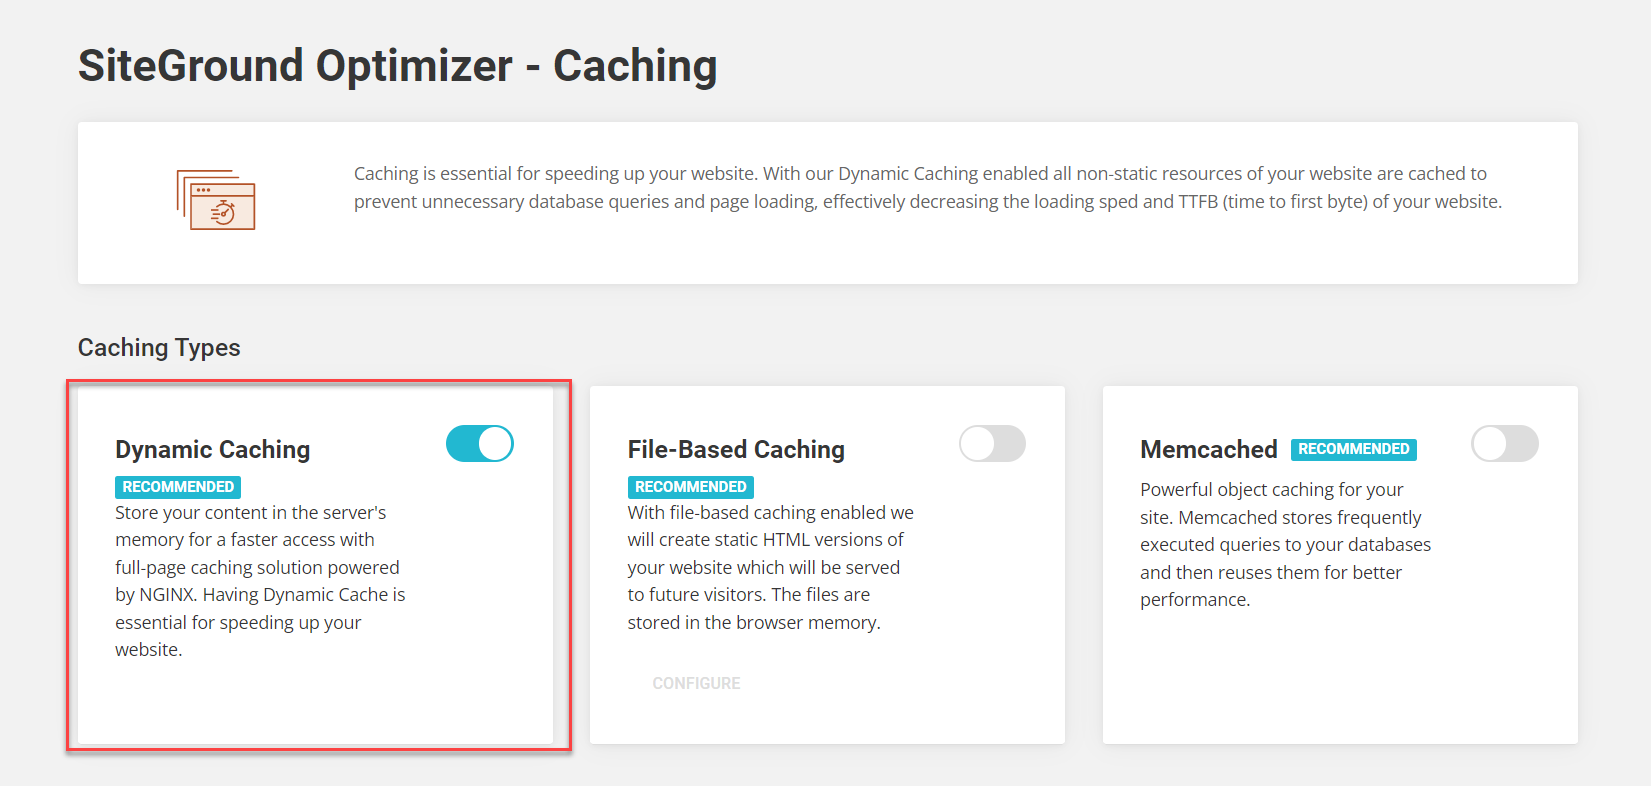 SG Caching - Enable Dynamic Caching